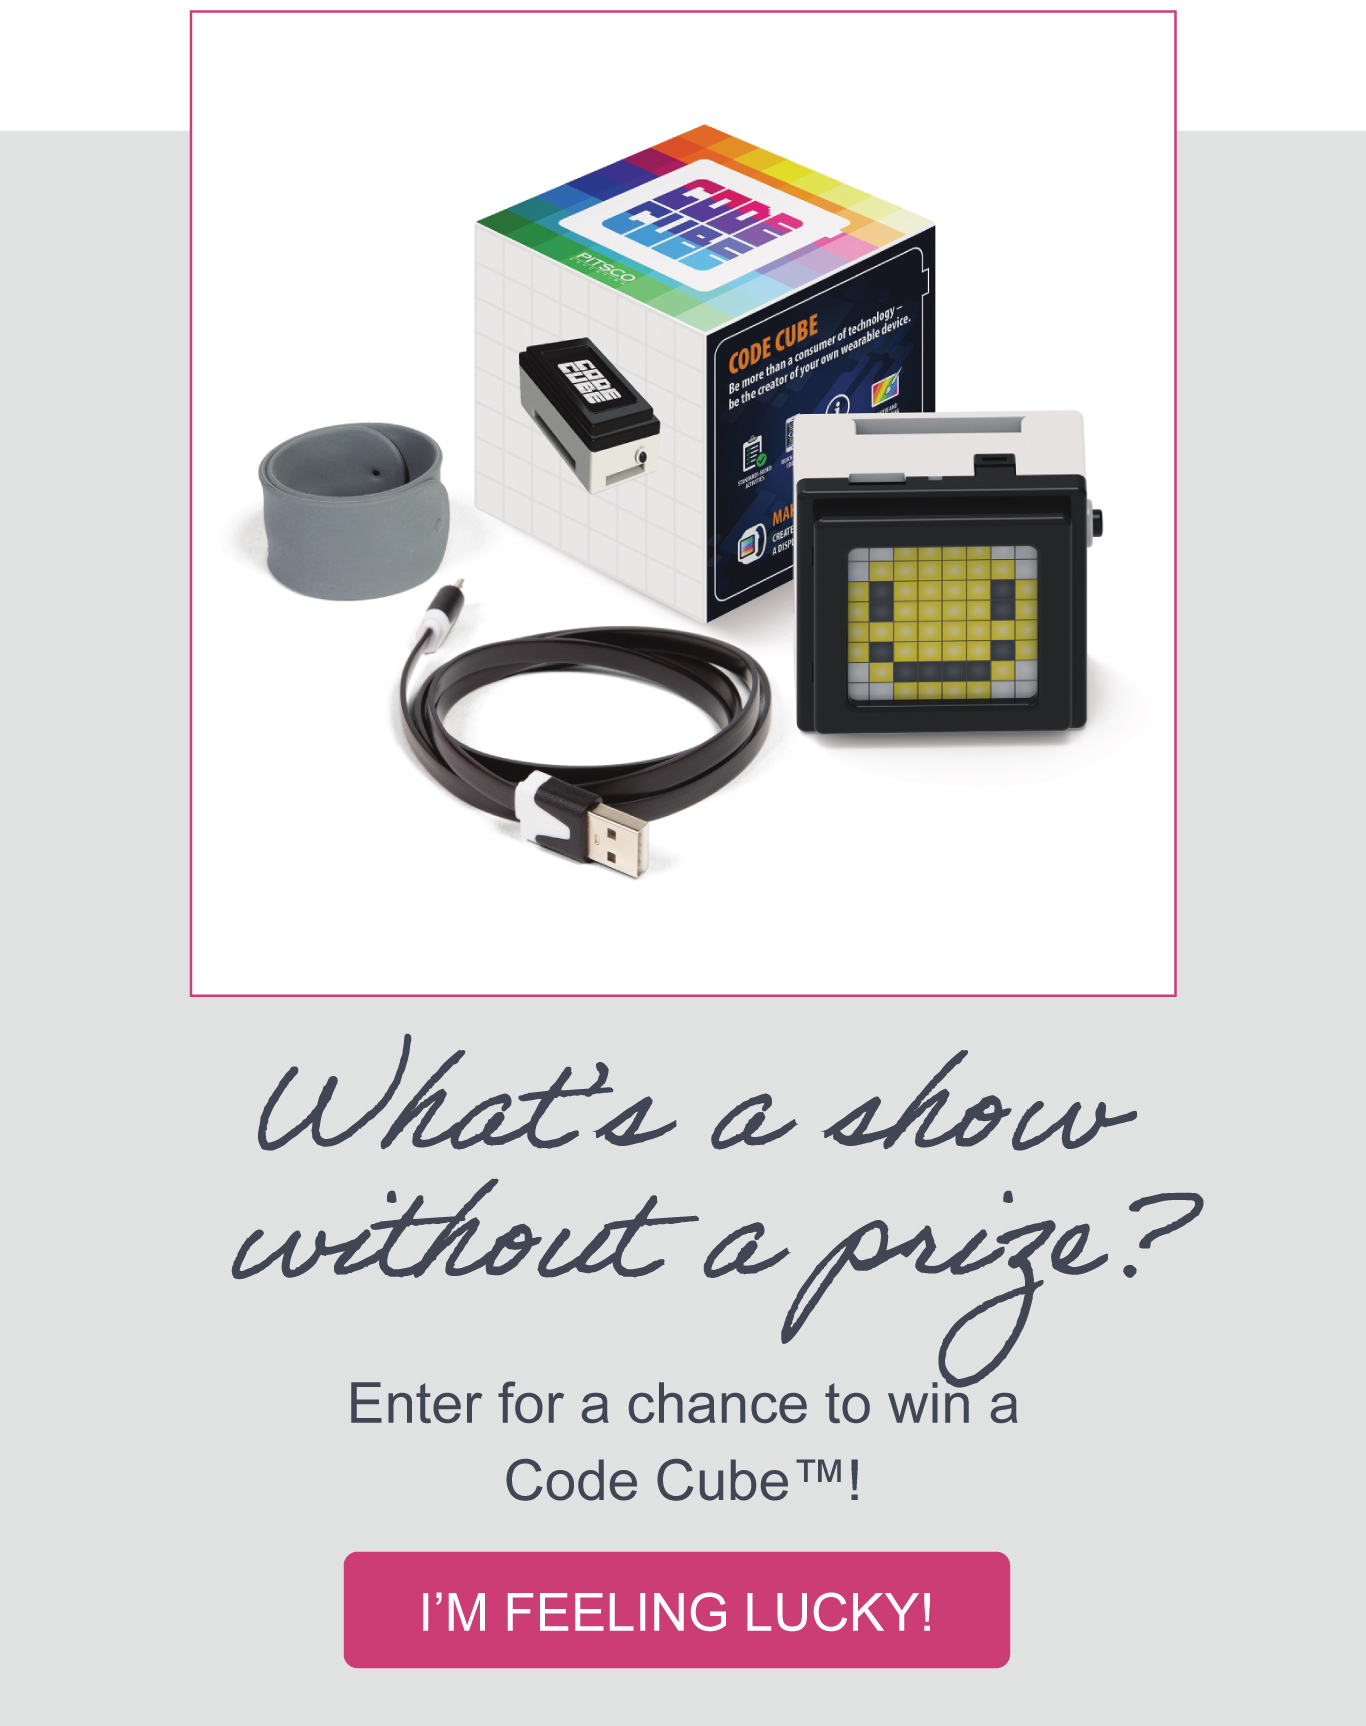 What’s a show without a prize? Enter for a chance to win a Code Cube™! I’M FEELING LUCKY